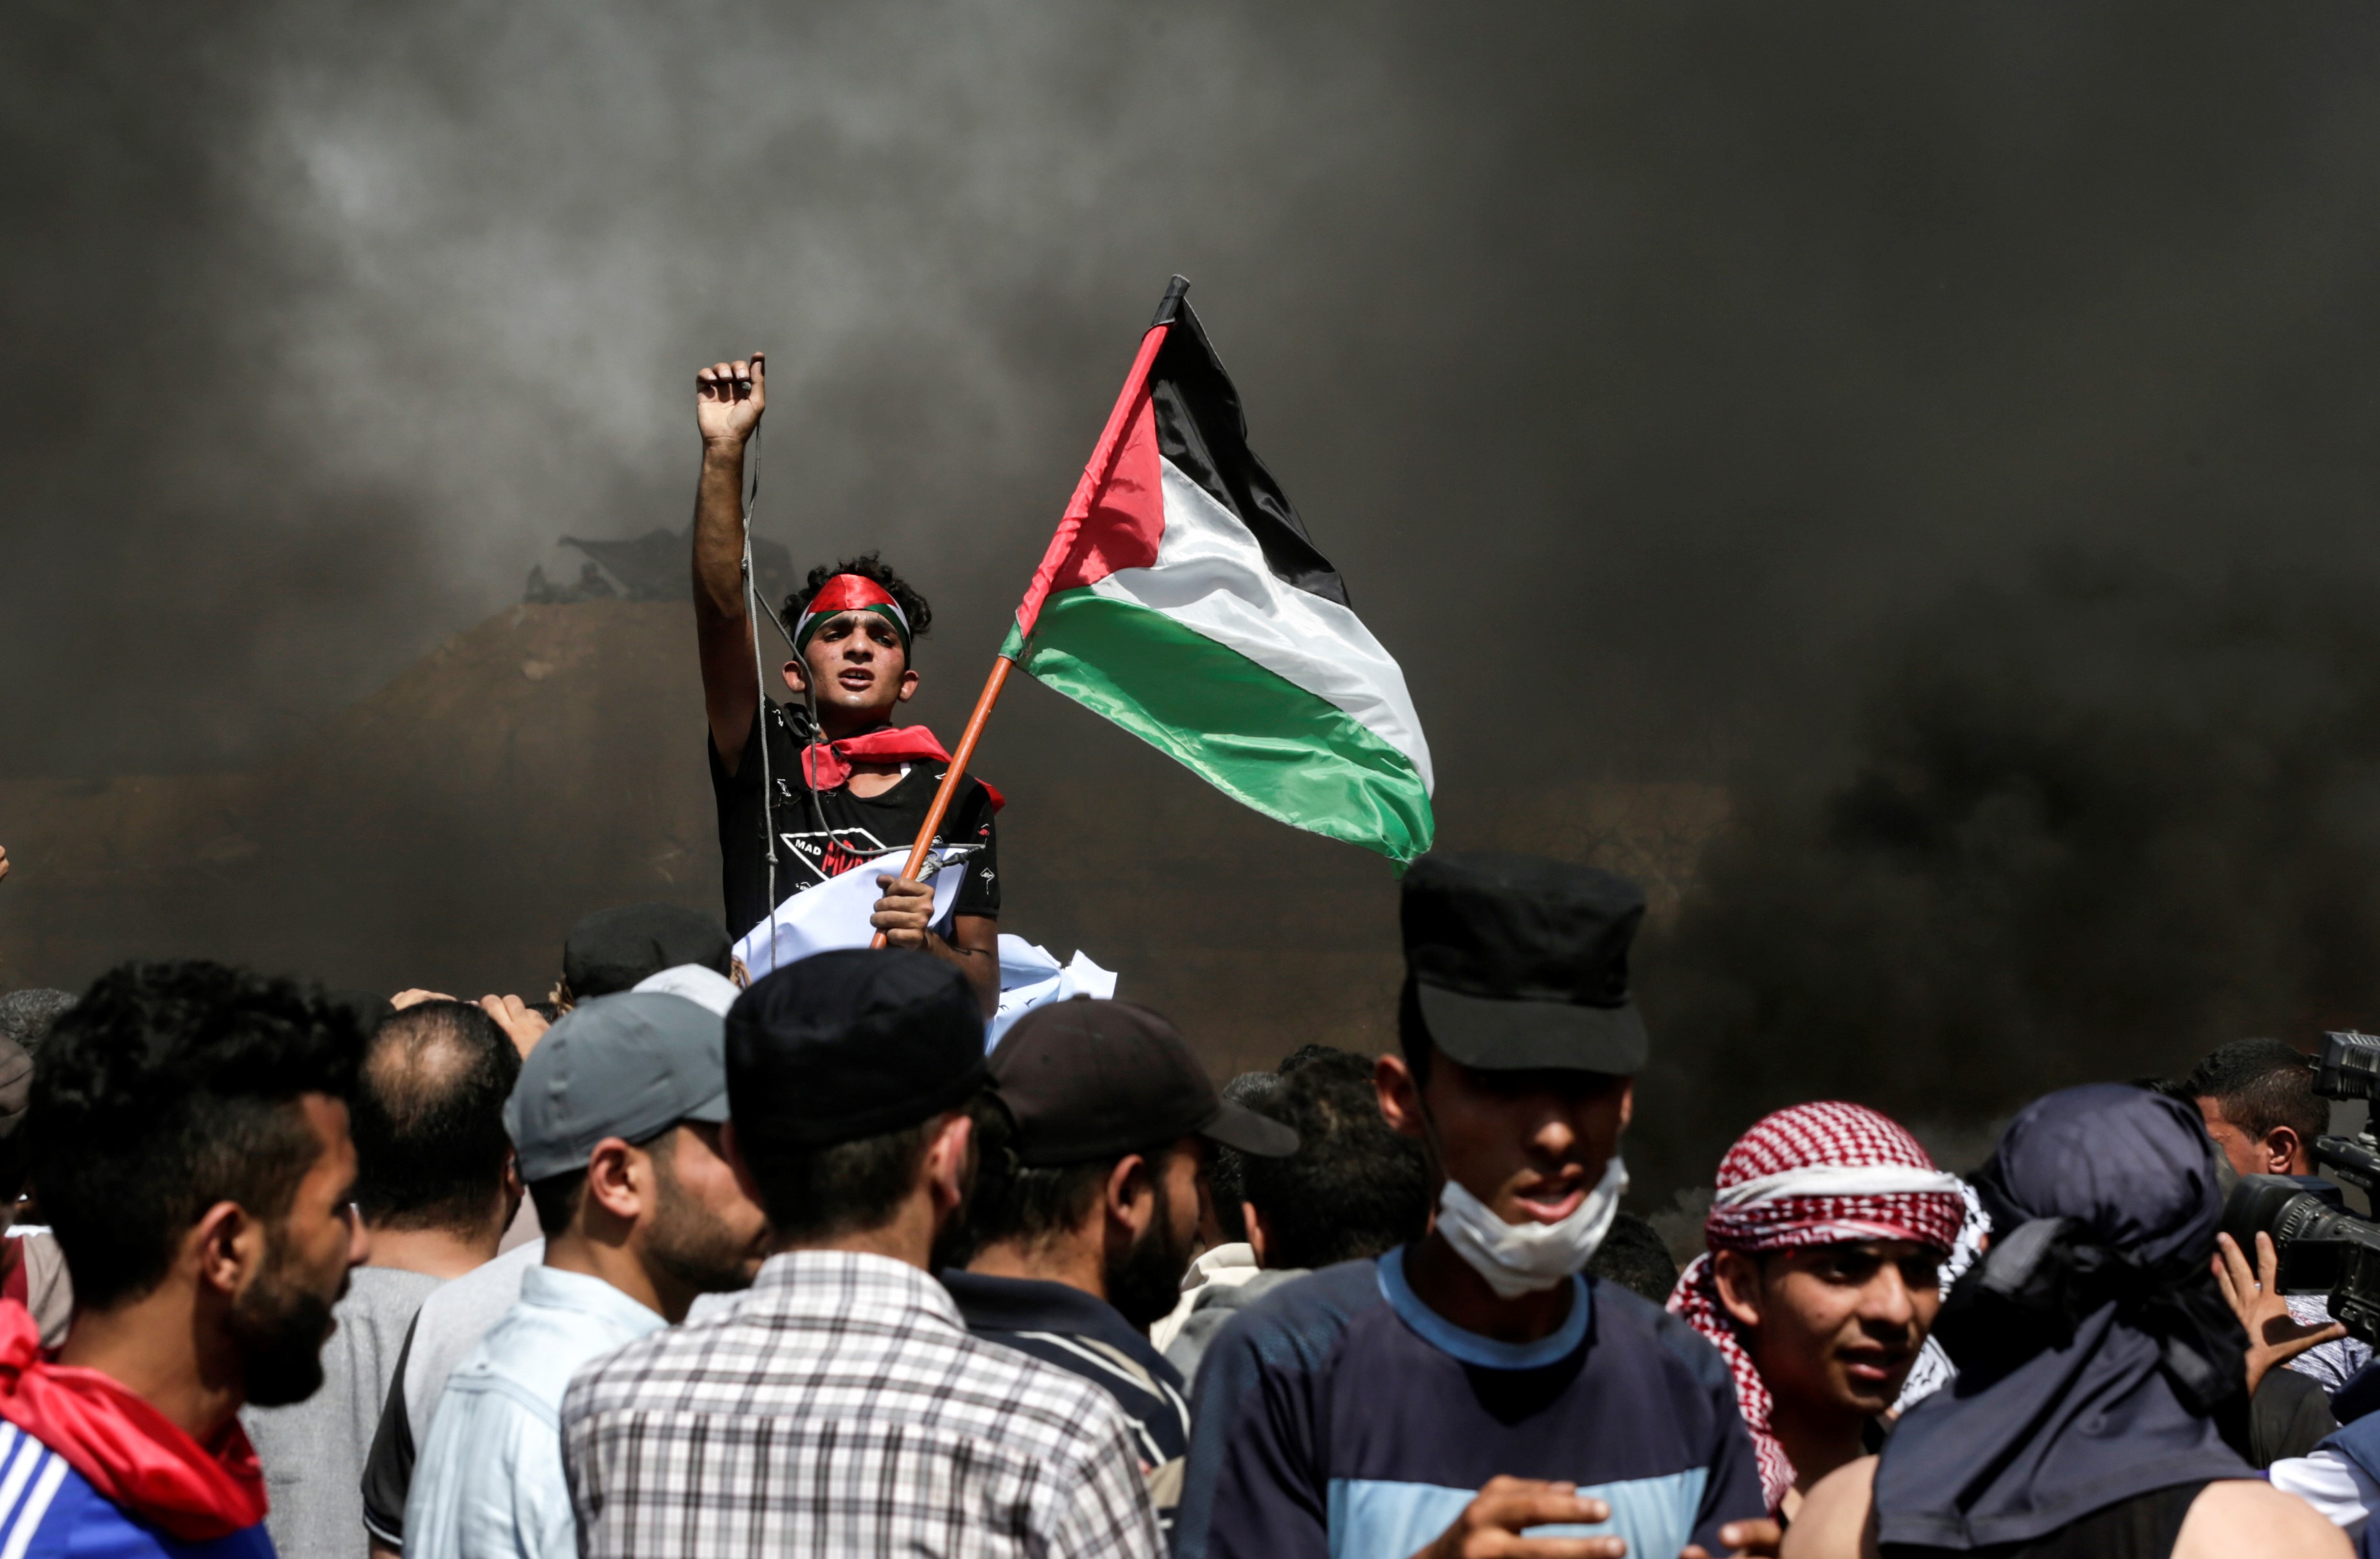  A Palestinian protester waves his national flag as smoke billows from burning tyres during a demonstration along the border between the Gaza strip and Israel on 8 June, 2018 (AFP)